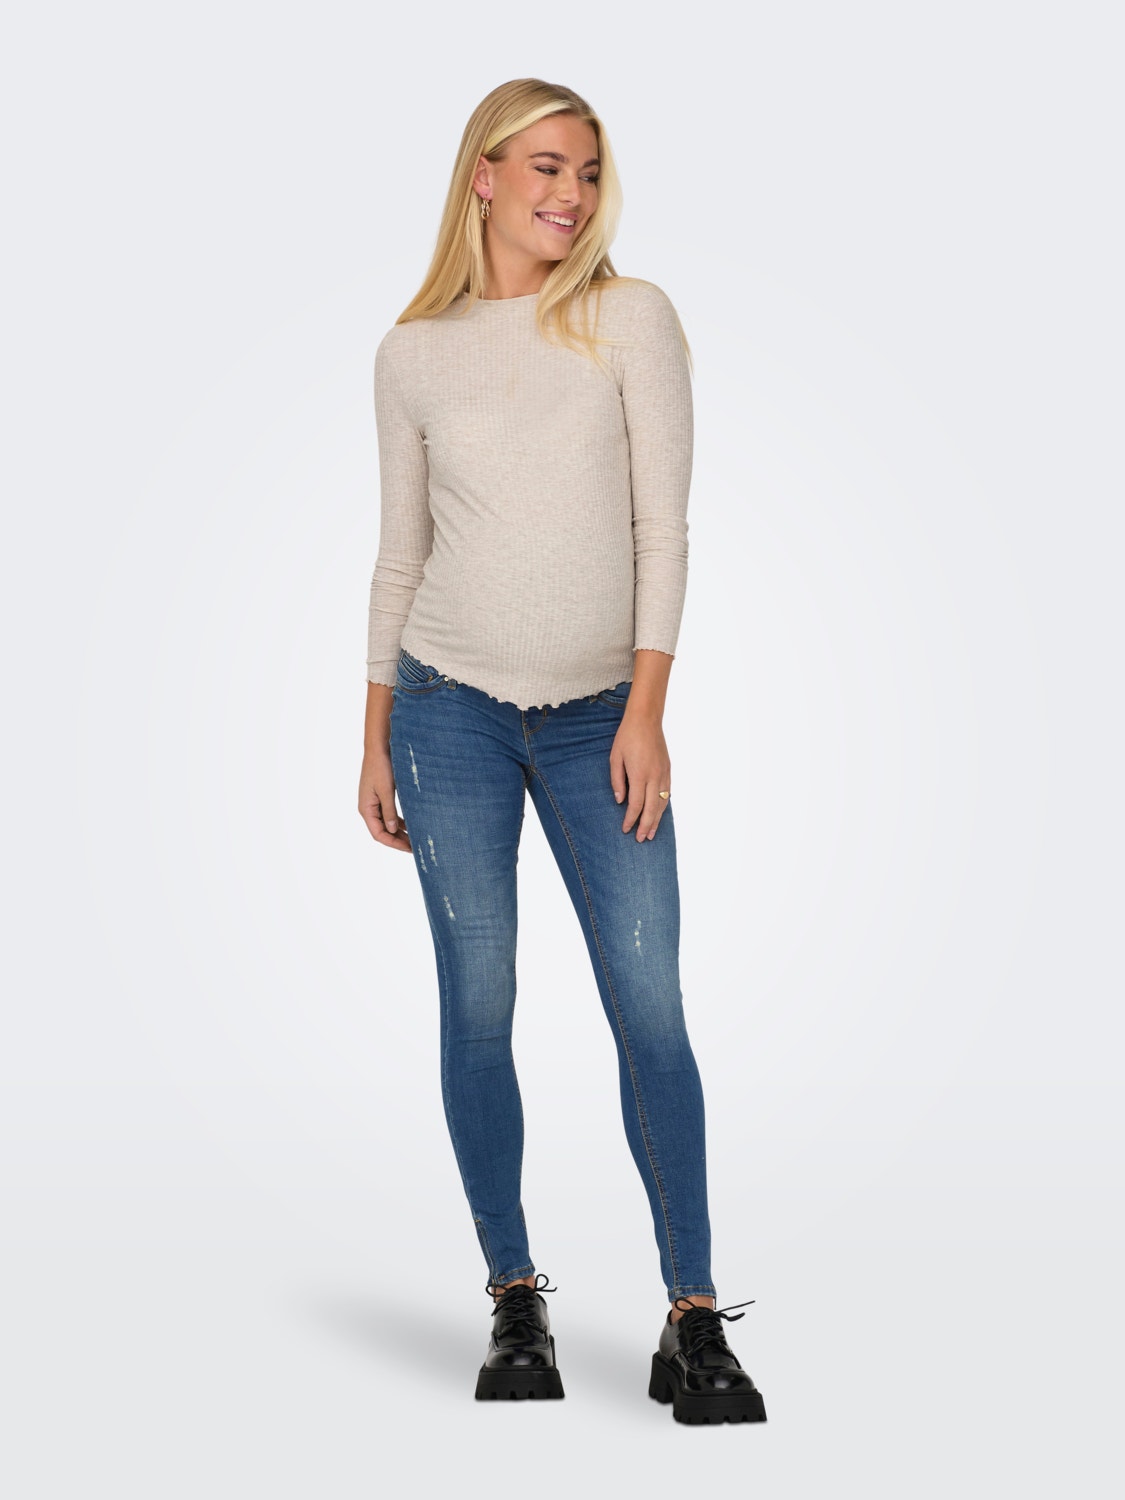 ONLY Mama high neck Top -Pumice Stone - 15249581